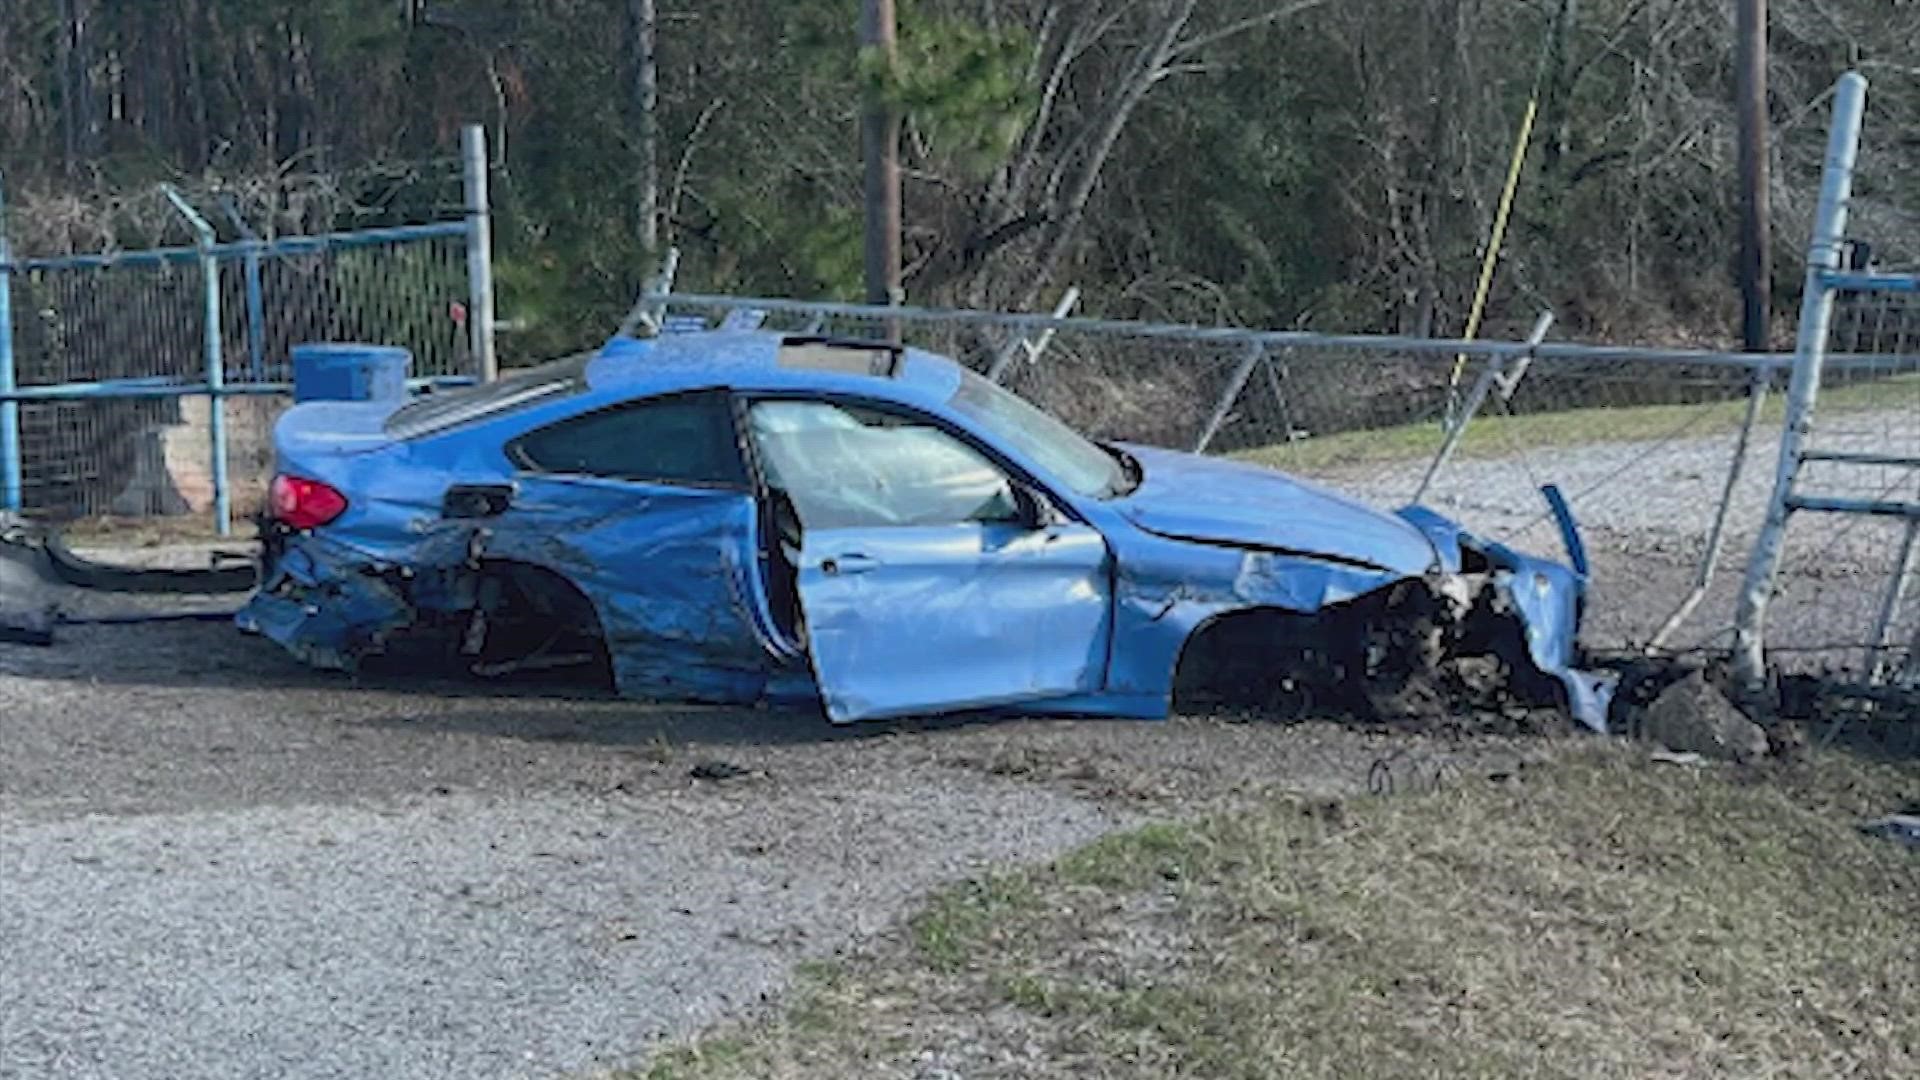 The Chambers County Sheriff's Office said a deputy found the driver dead after multiple calls came in about street racing on the East Freeway headed toward Winnie.